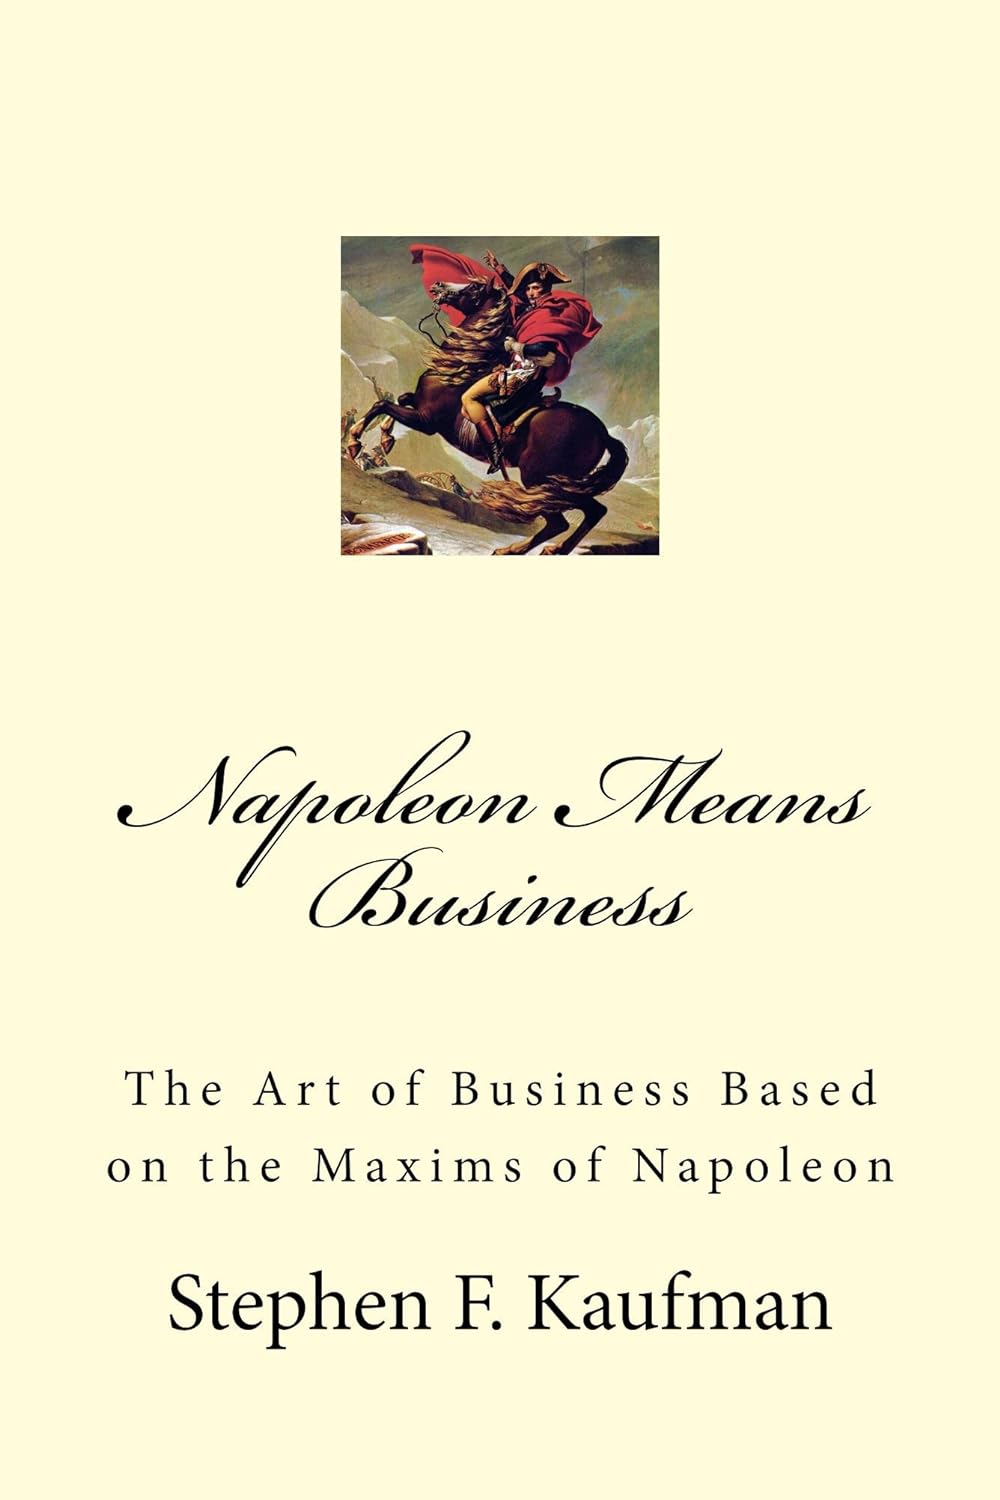 Napoleon Means Business - The Art of Business Based on the Maxims of Napoleon